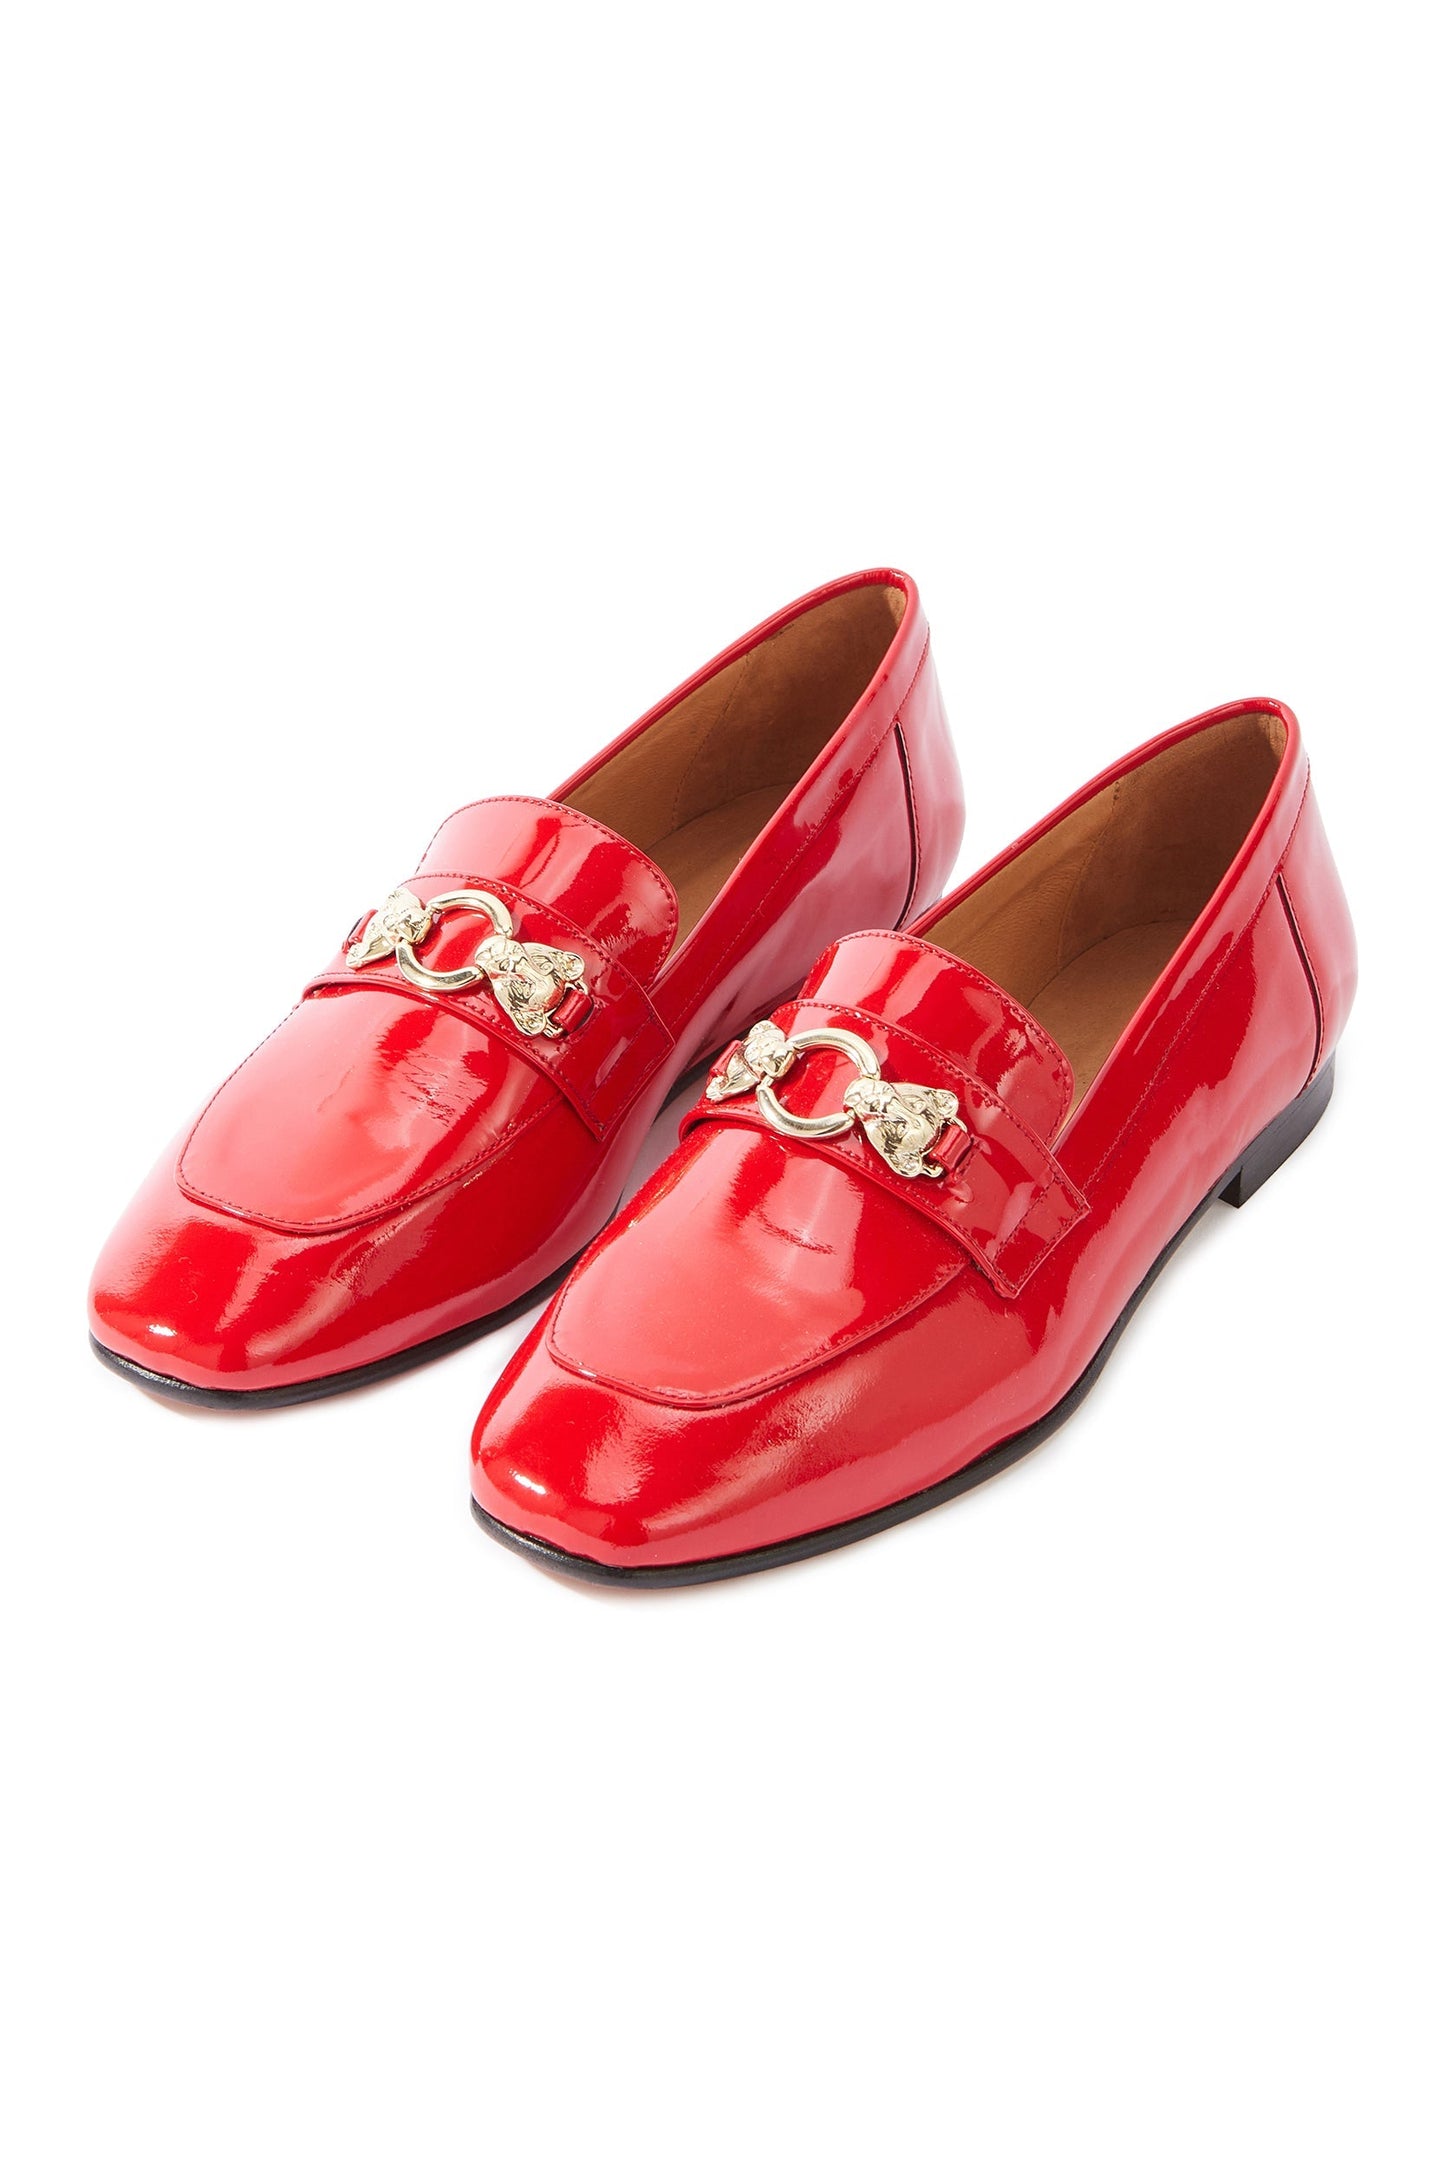 Flavie red patent moccasins